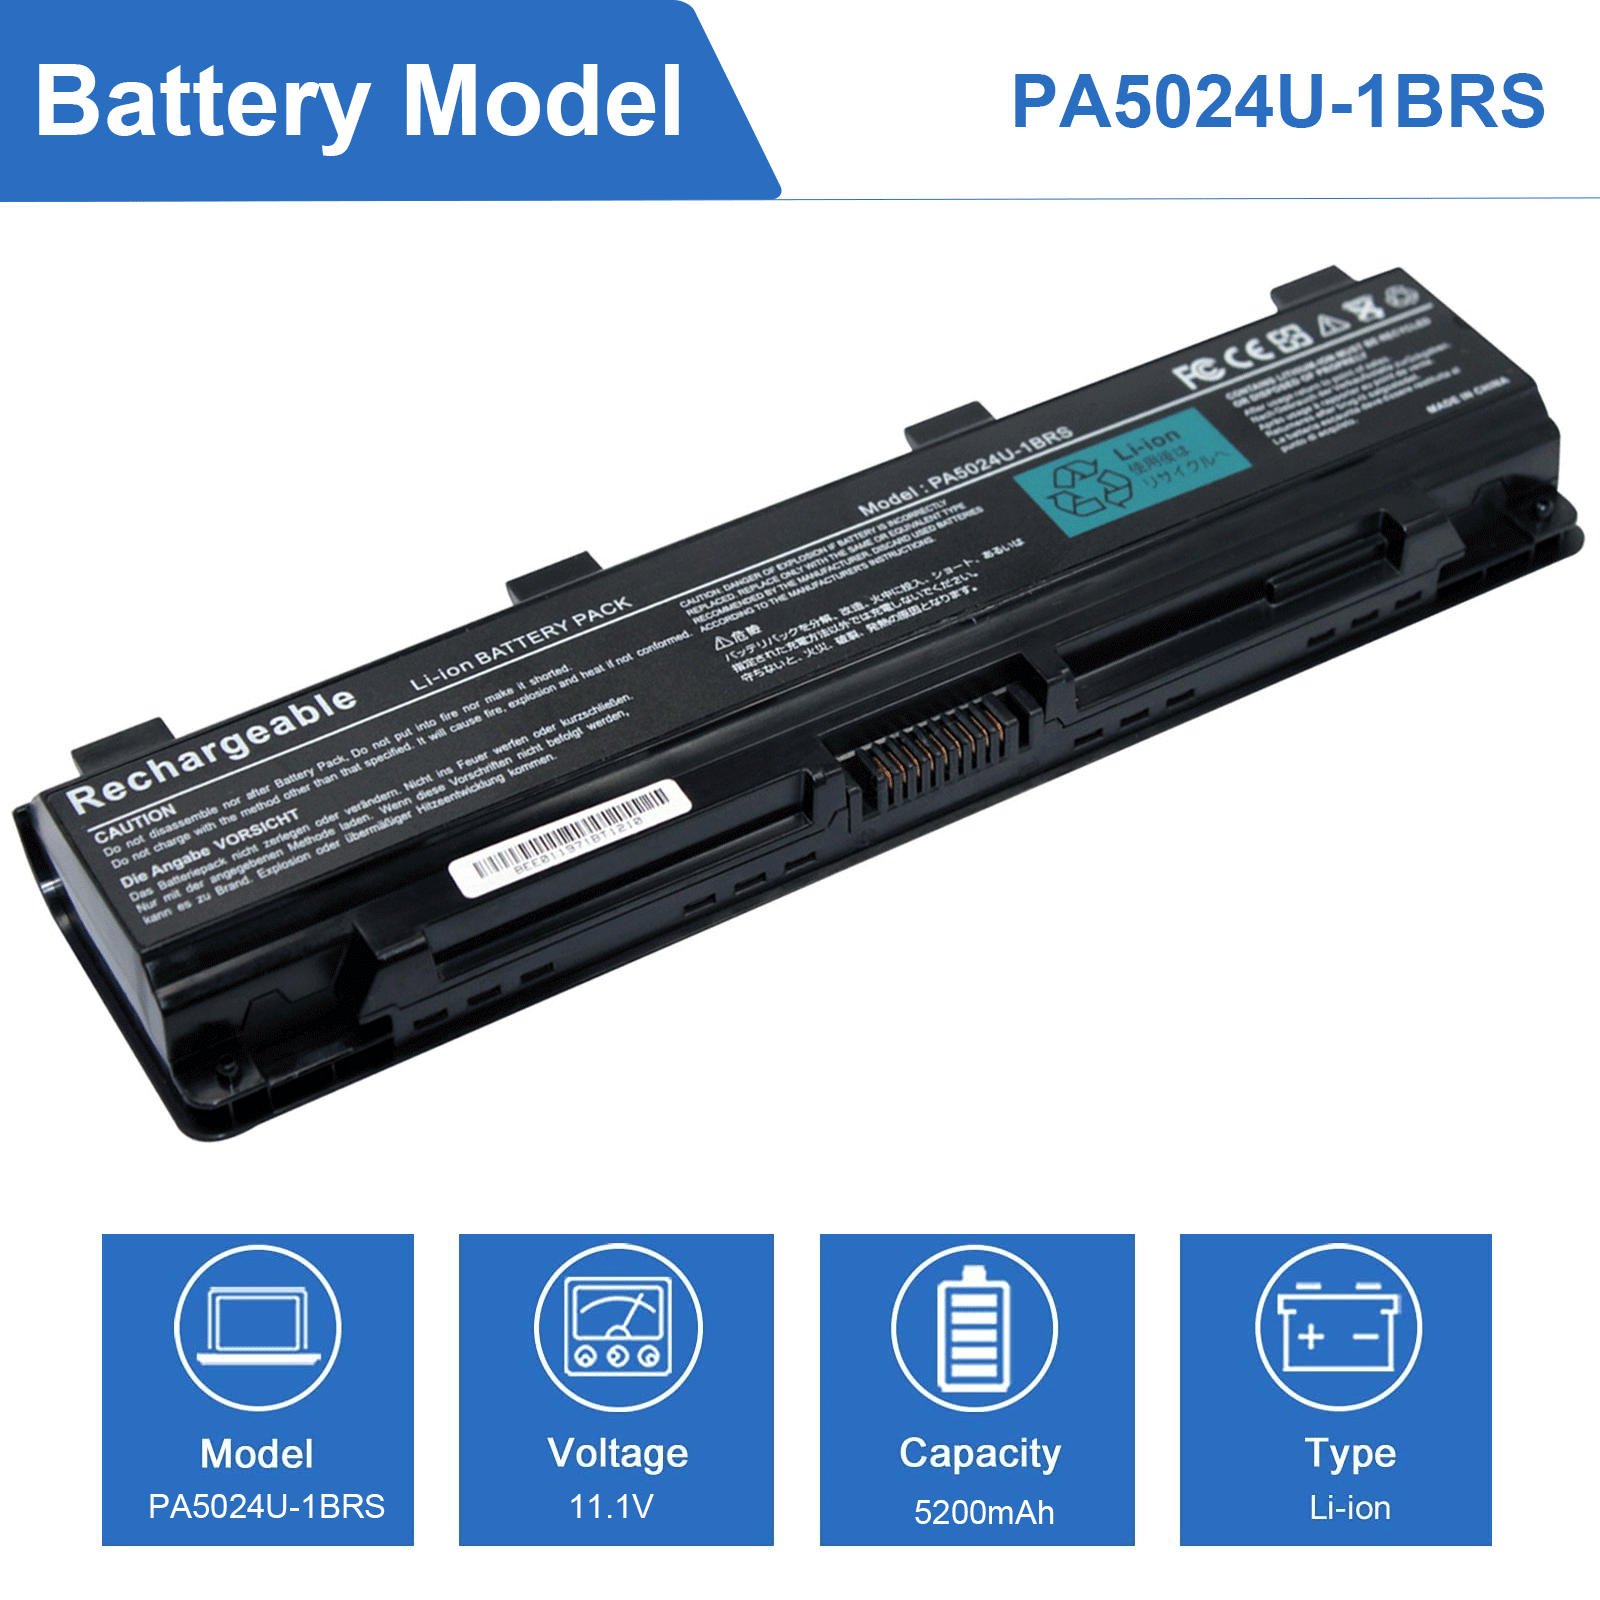 PA5024U-1BRS Battery for Toshiba Satellite C55-A5308 C55-A5310 C55-A5311 C55-A5324